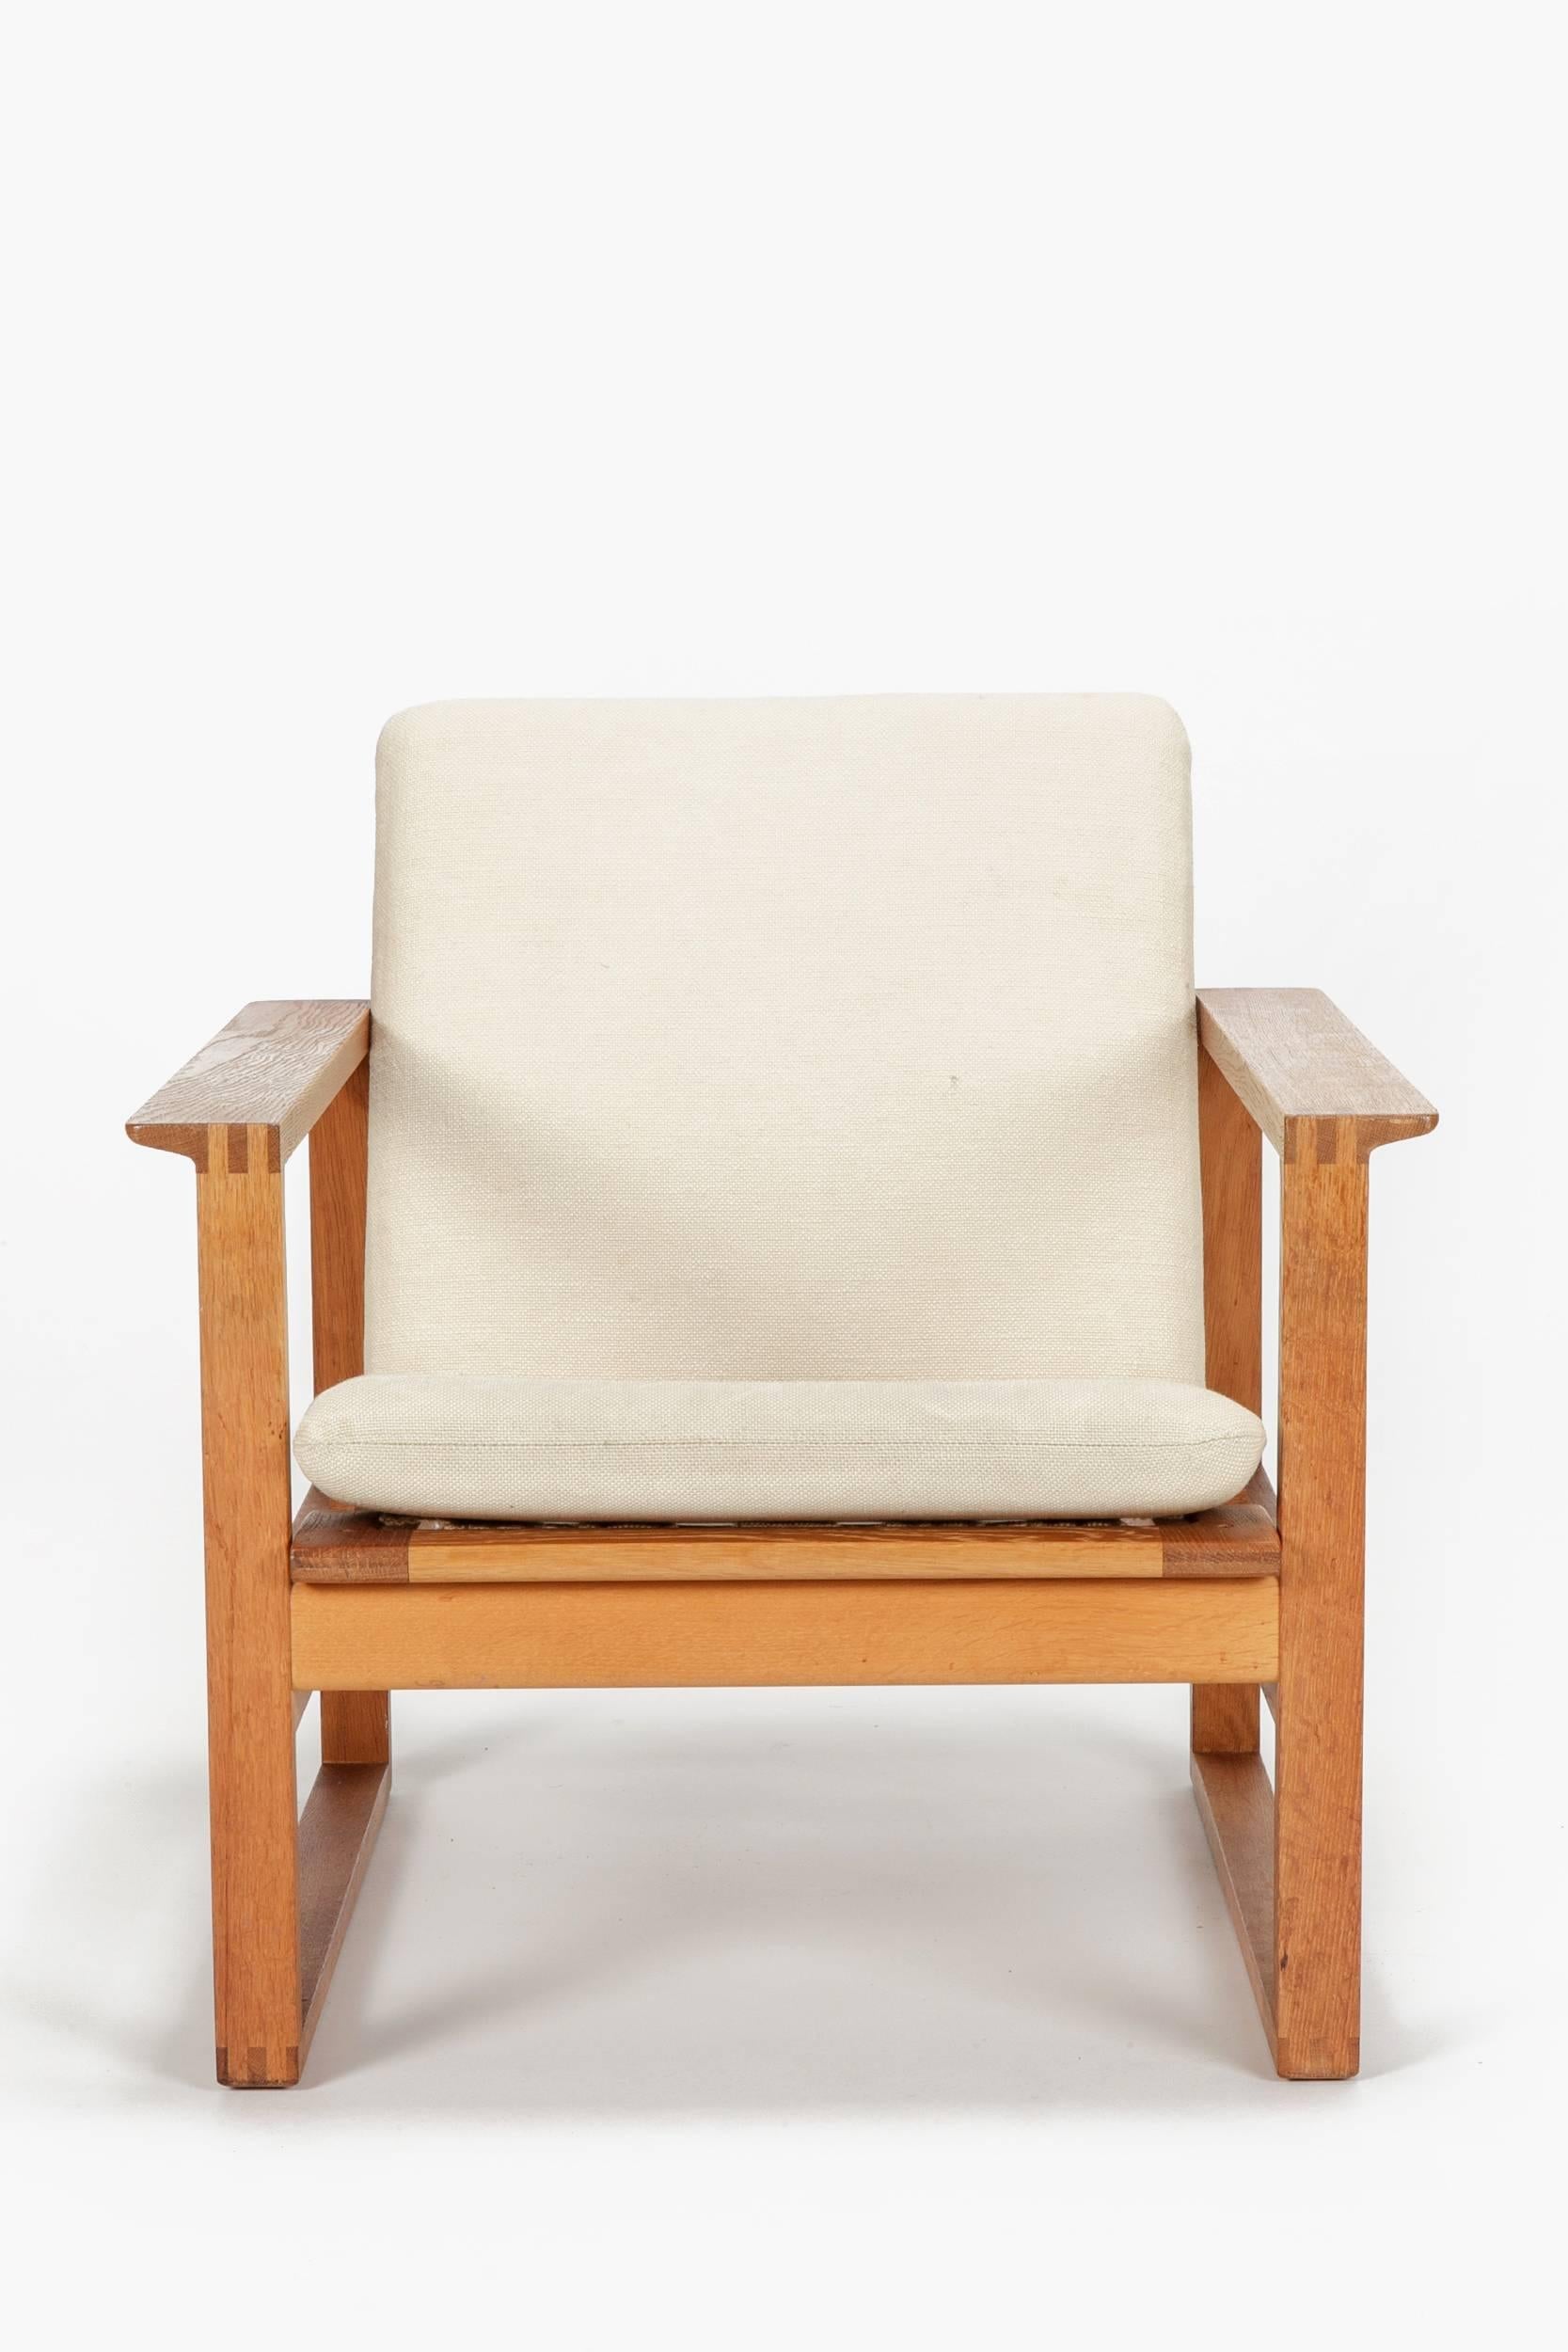 A single Borge Mogensen lounge chair designed in 1956 model No 2256 for Fredericia, manufactured in the early 1960s. Cubical frame made of solid oak with finger joints, original cushions in a cream colored linen fabric. The seat cushion can be fixed